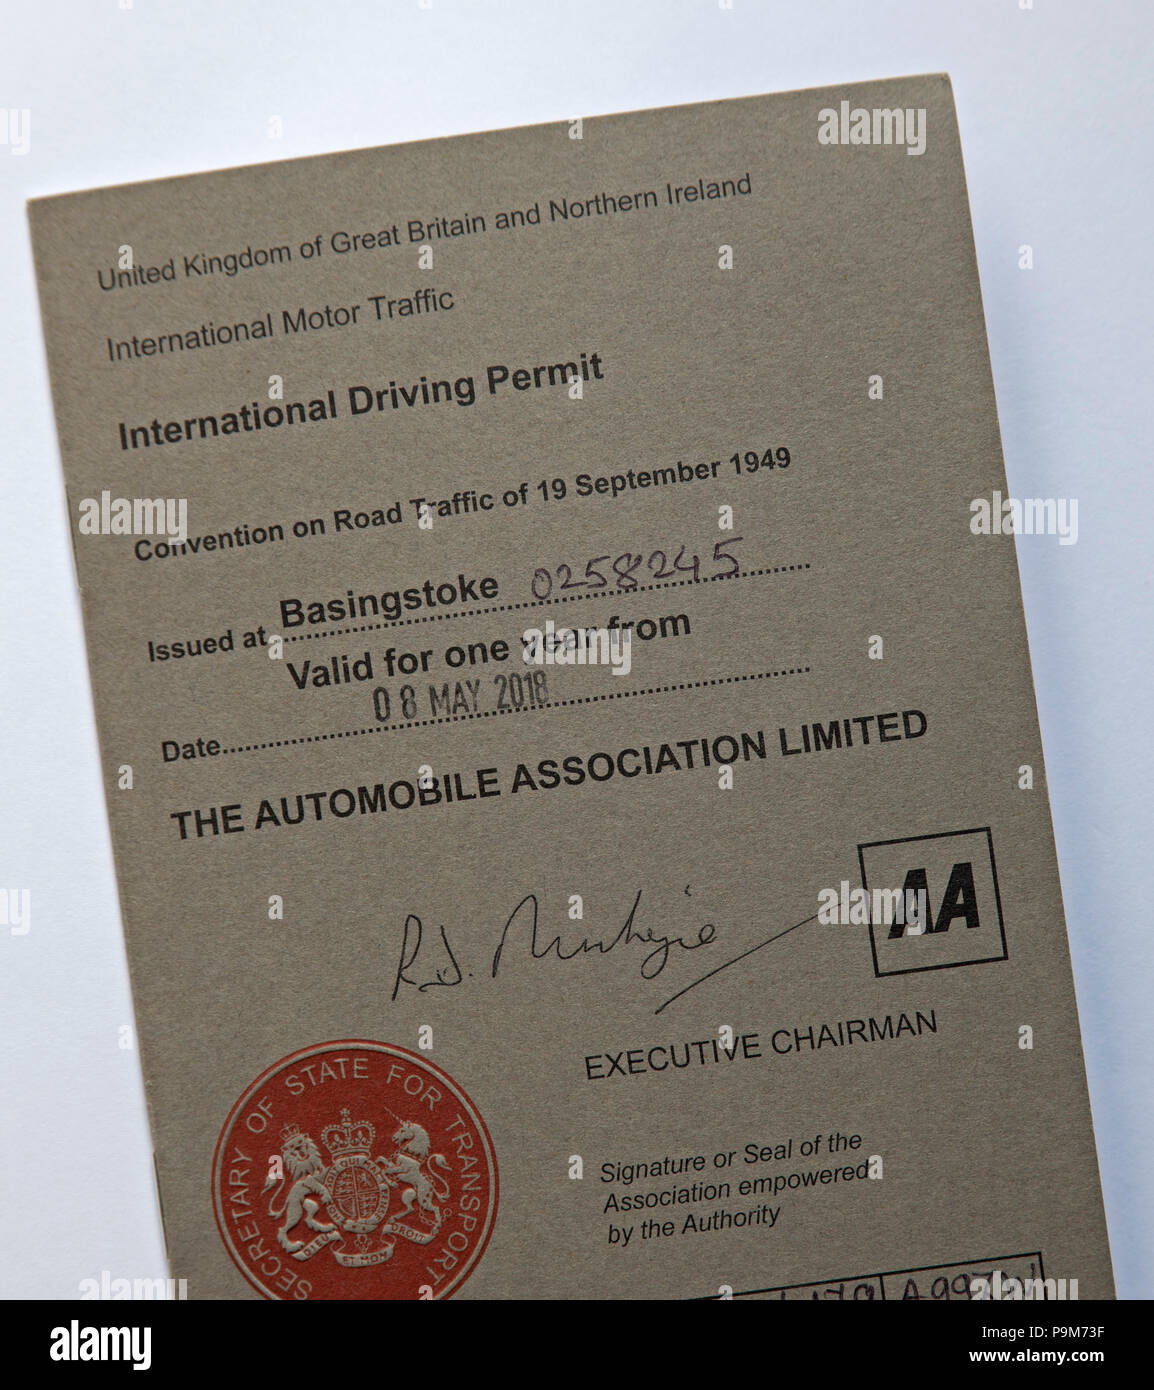 Edinburgh, UK. 19th July 2018. After Brexit, fears that millions of drivers heading for Europe will need to buy £5.50 International Driving permits and Post Office may be unable to cope. Stock Photo